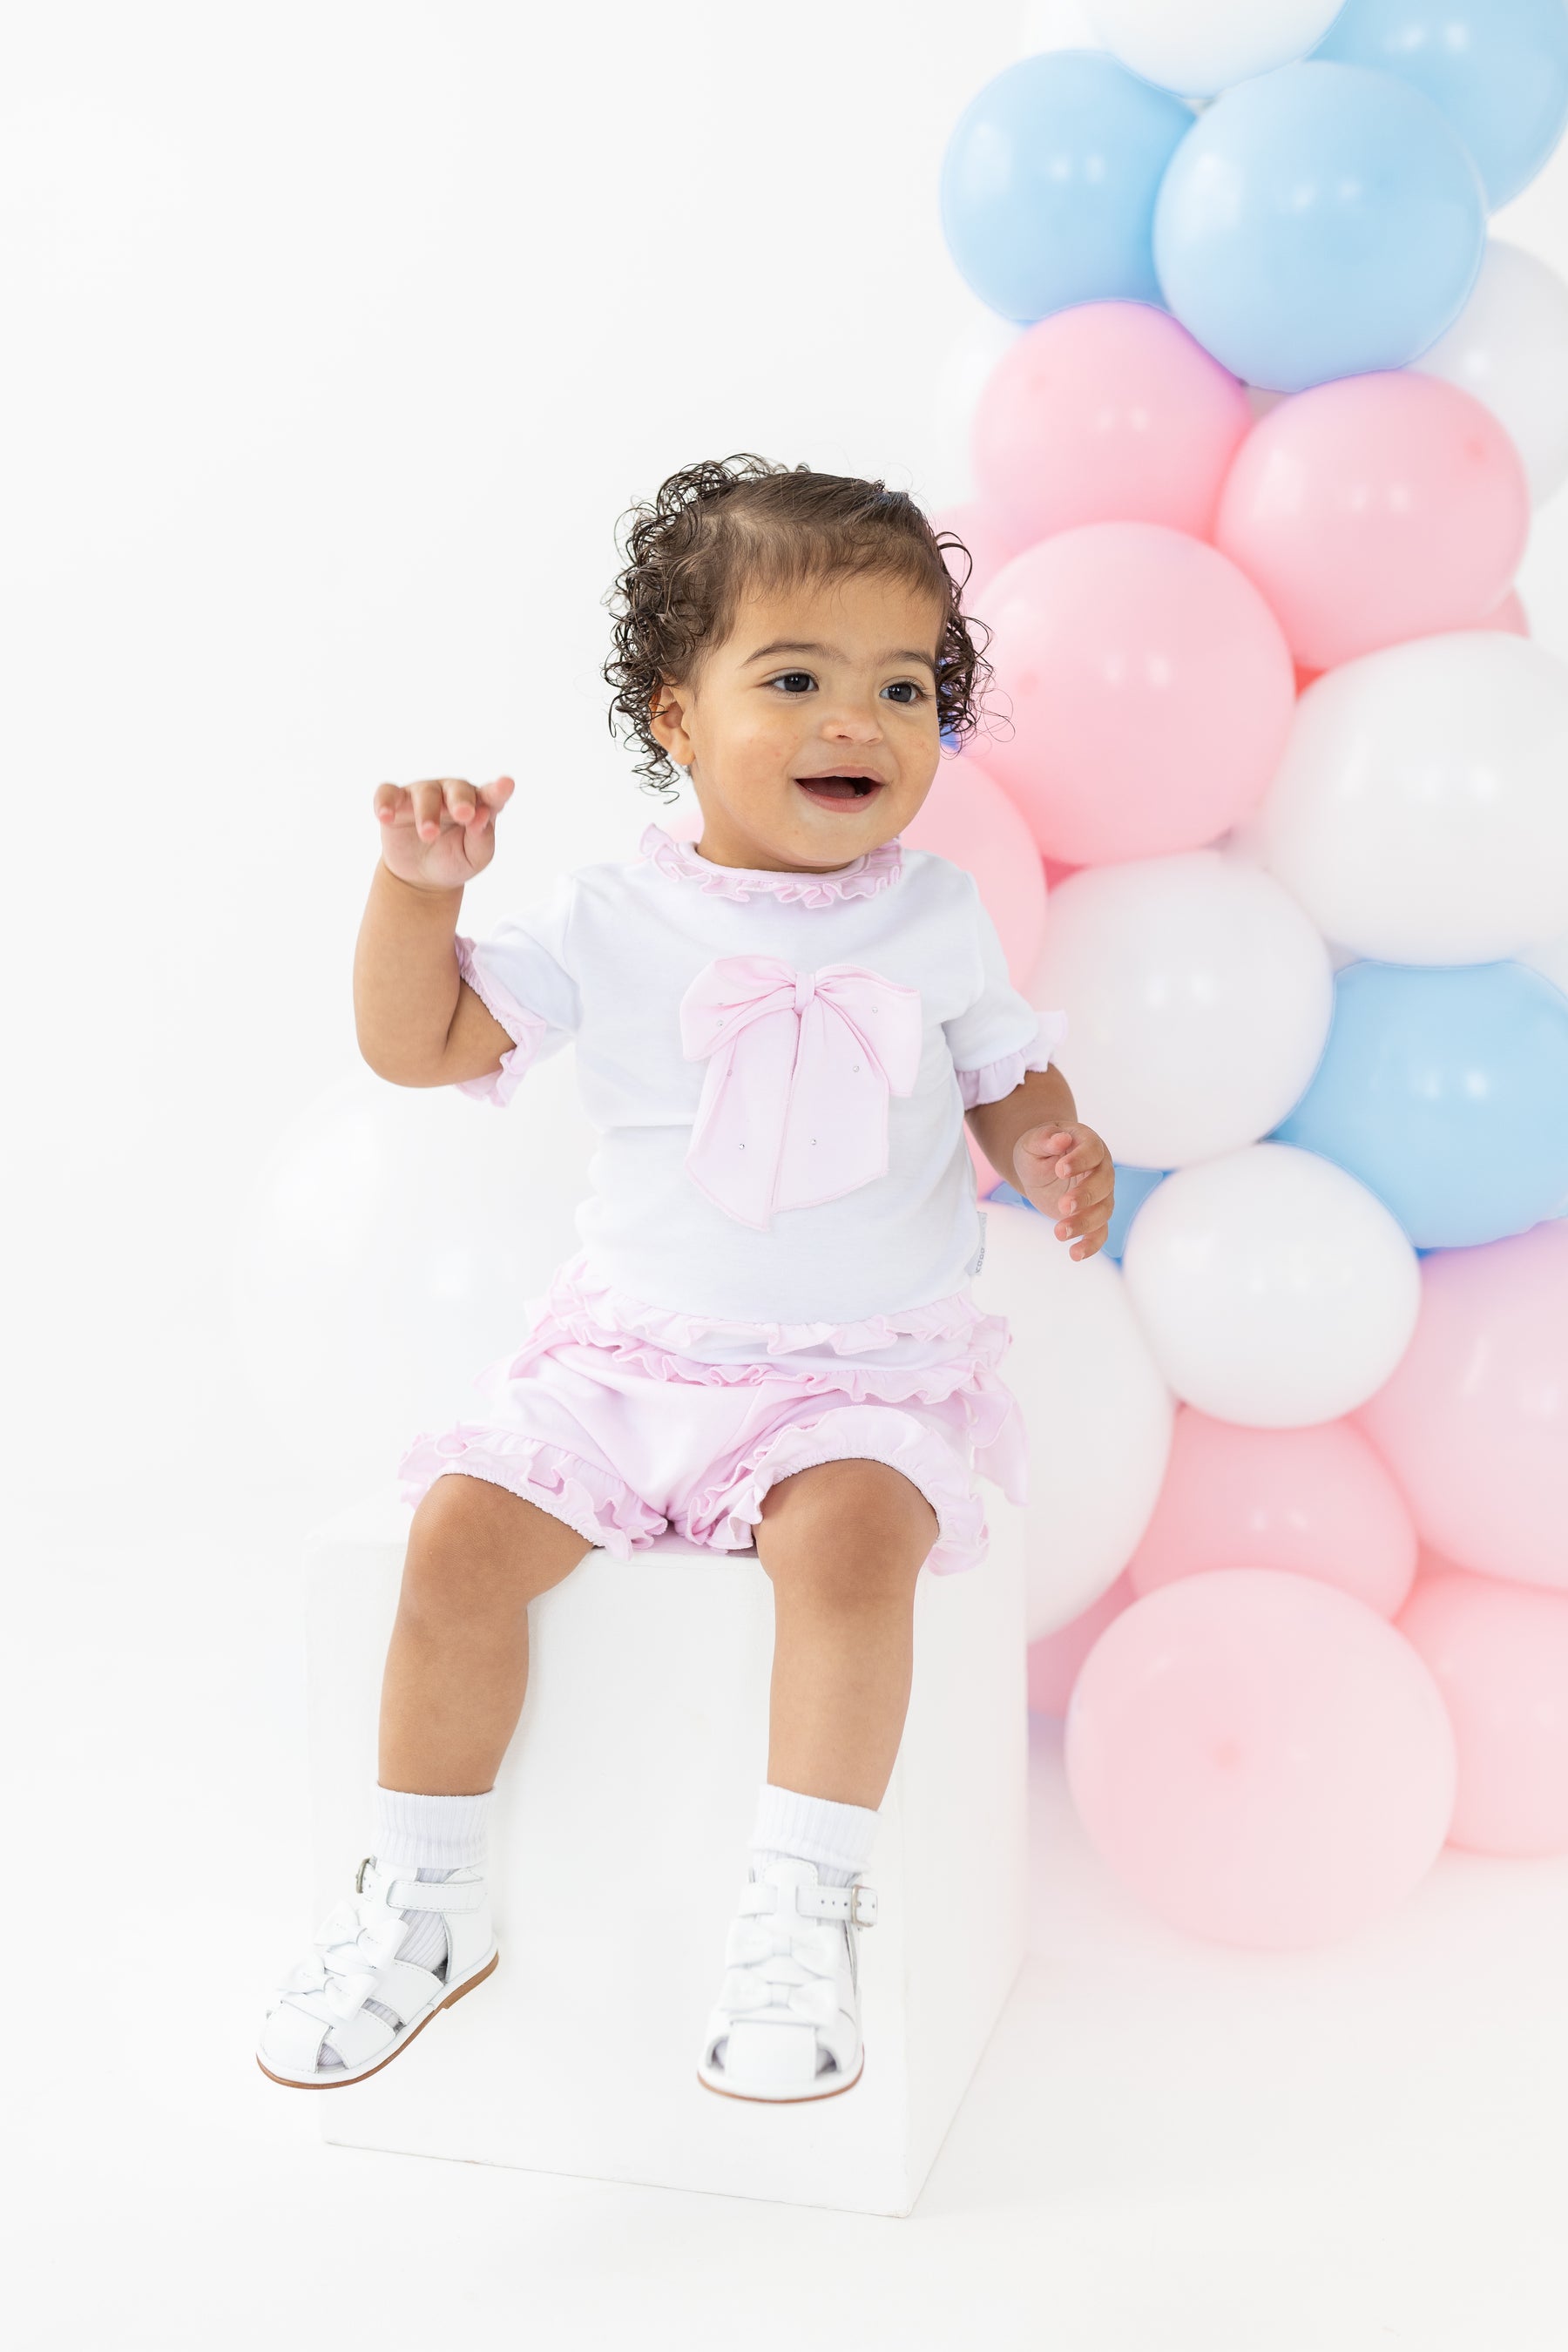 Introduce your little one to style with this adorable two piece set from kids boutique brand Blues Baby. The white t-shirt features a sparkling pink diamanté bow, while the pink frilly shorts add a touch of girly charm. Available in sizes 3 months to 24 months. Perfect for any occasion!